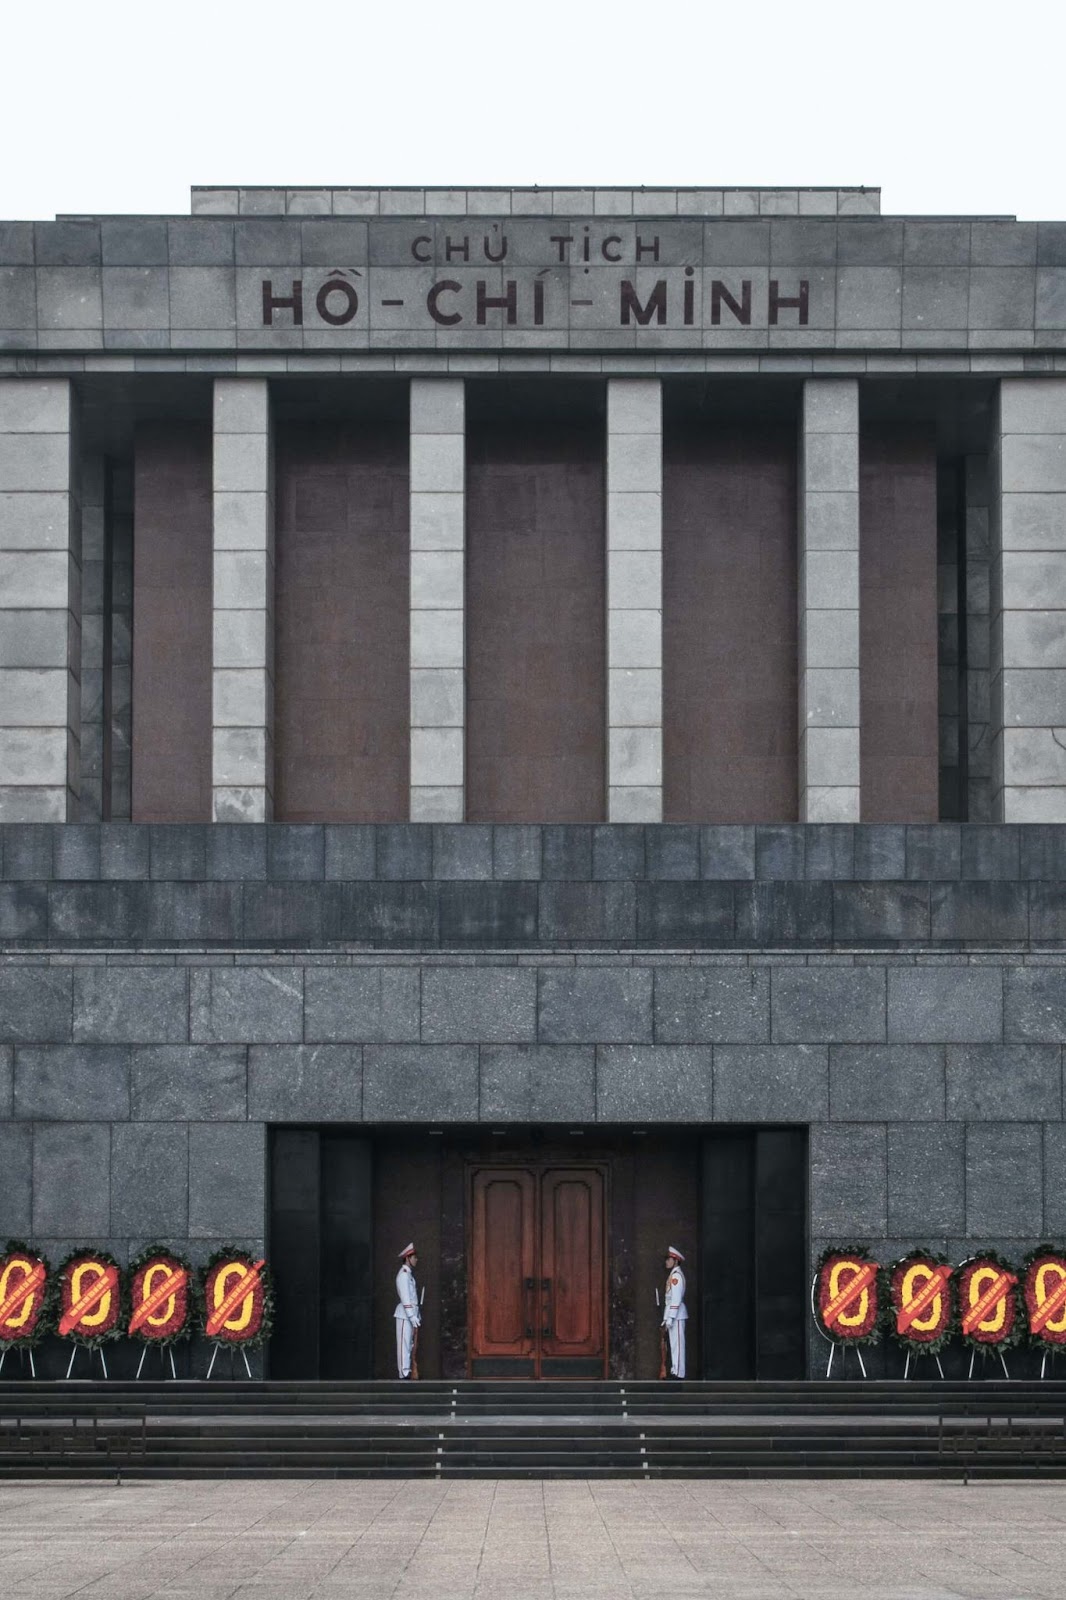 1 day in Hanoi, Ho Chi Minh Mausoleum, Vietnamese elements based on Russian design, body of embalmed leader Ho Chi Minh